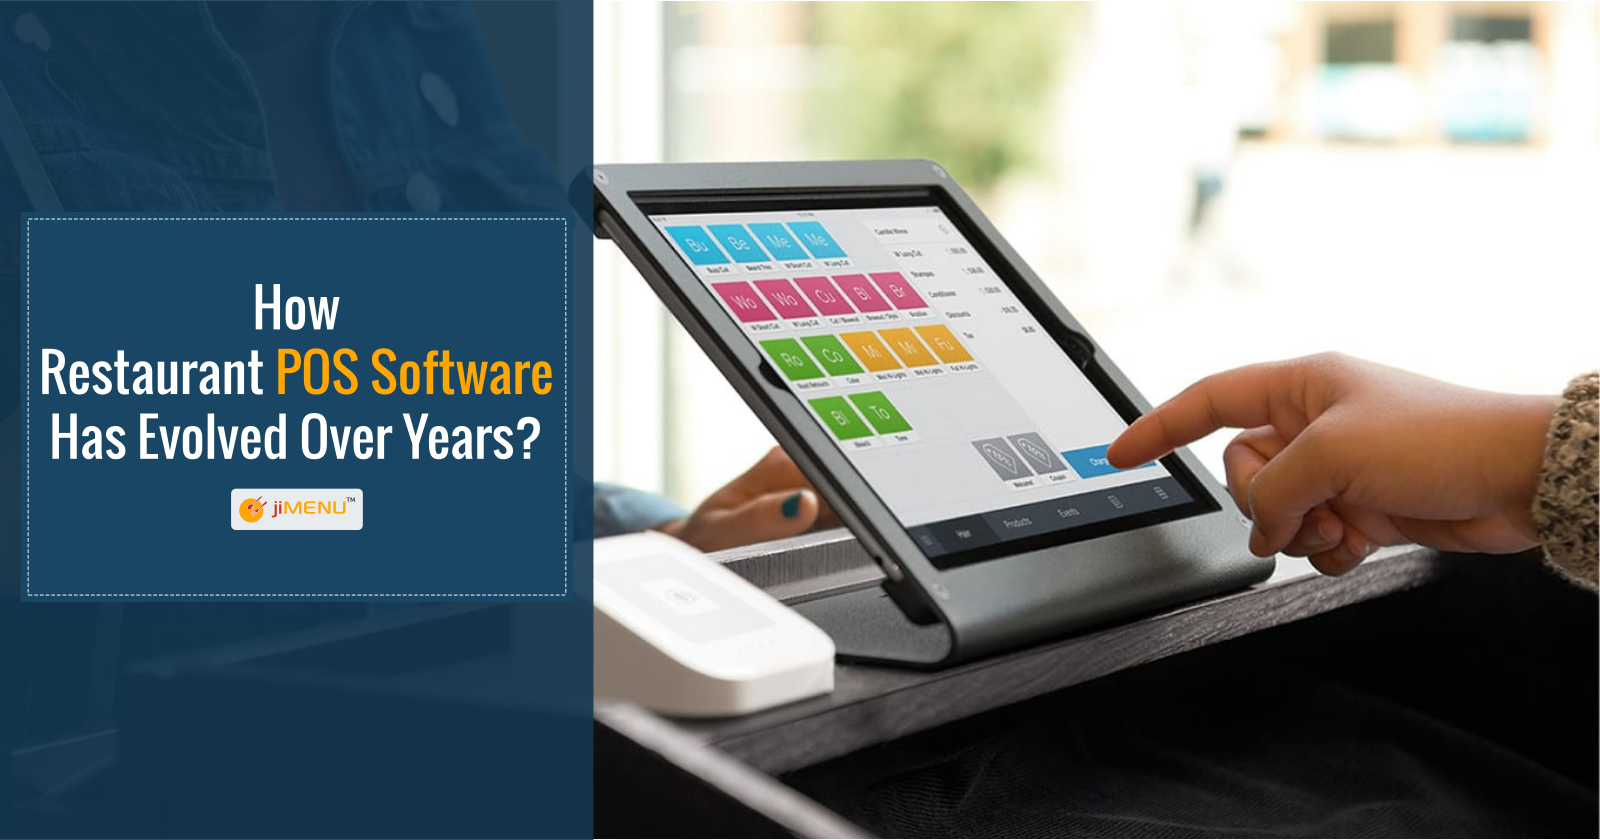 How Restaurant POS Software Has Evolved Over Years?